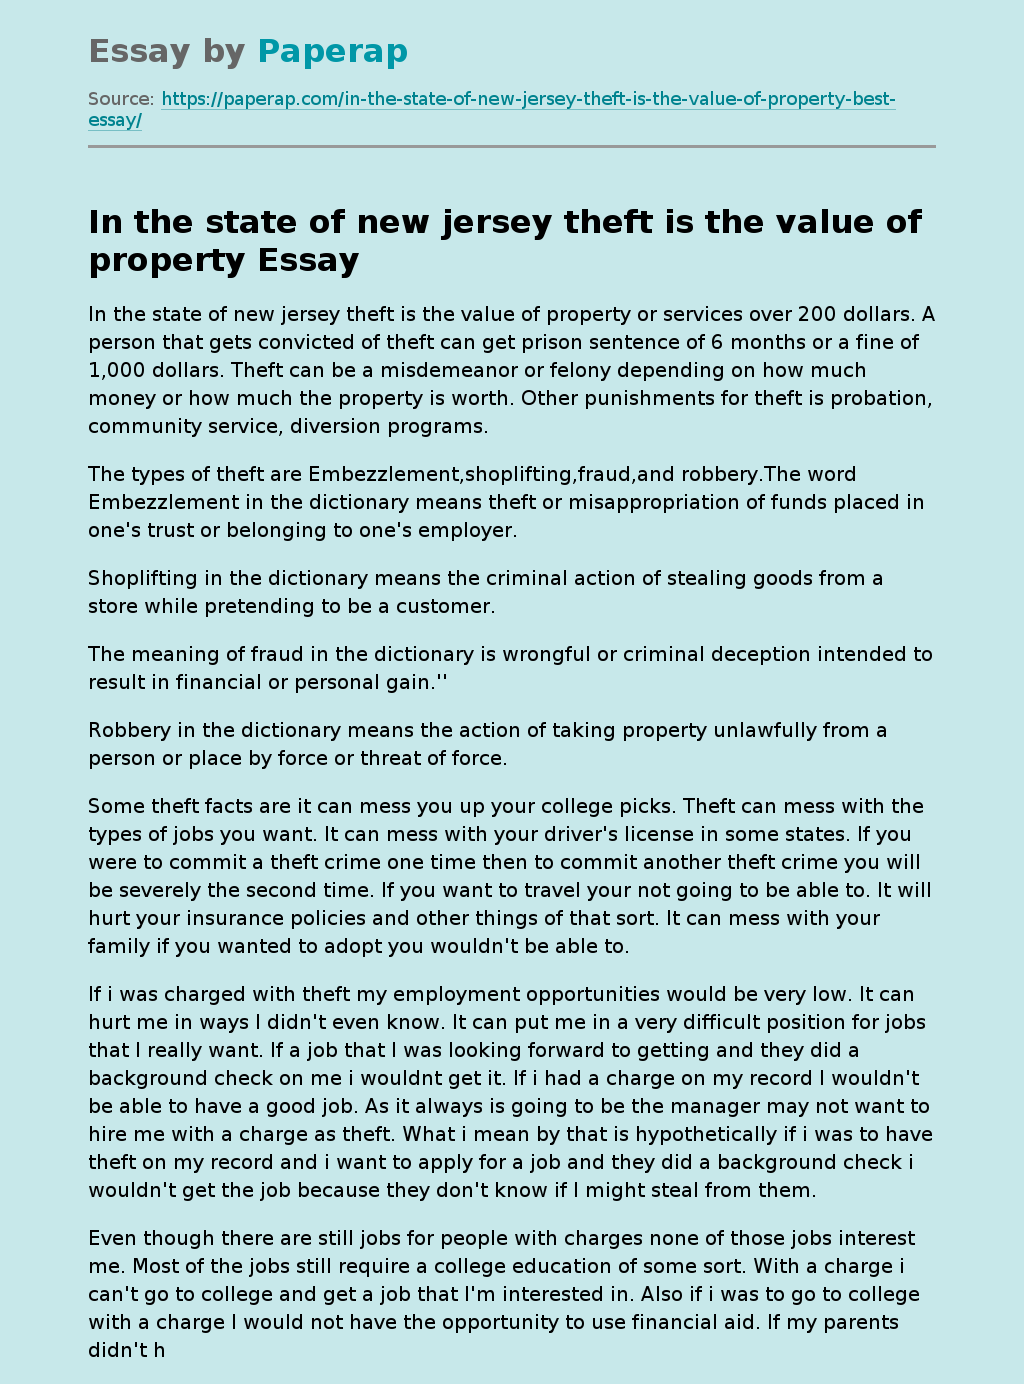 Theft Issue in New Jersey